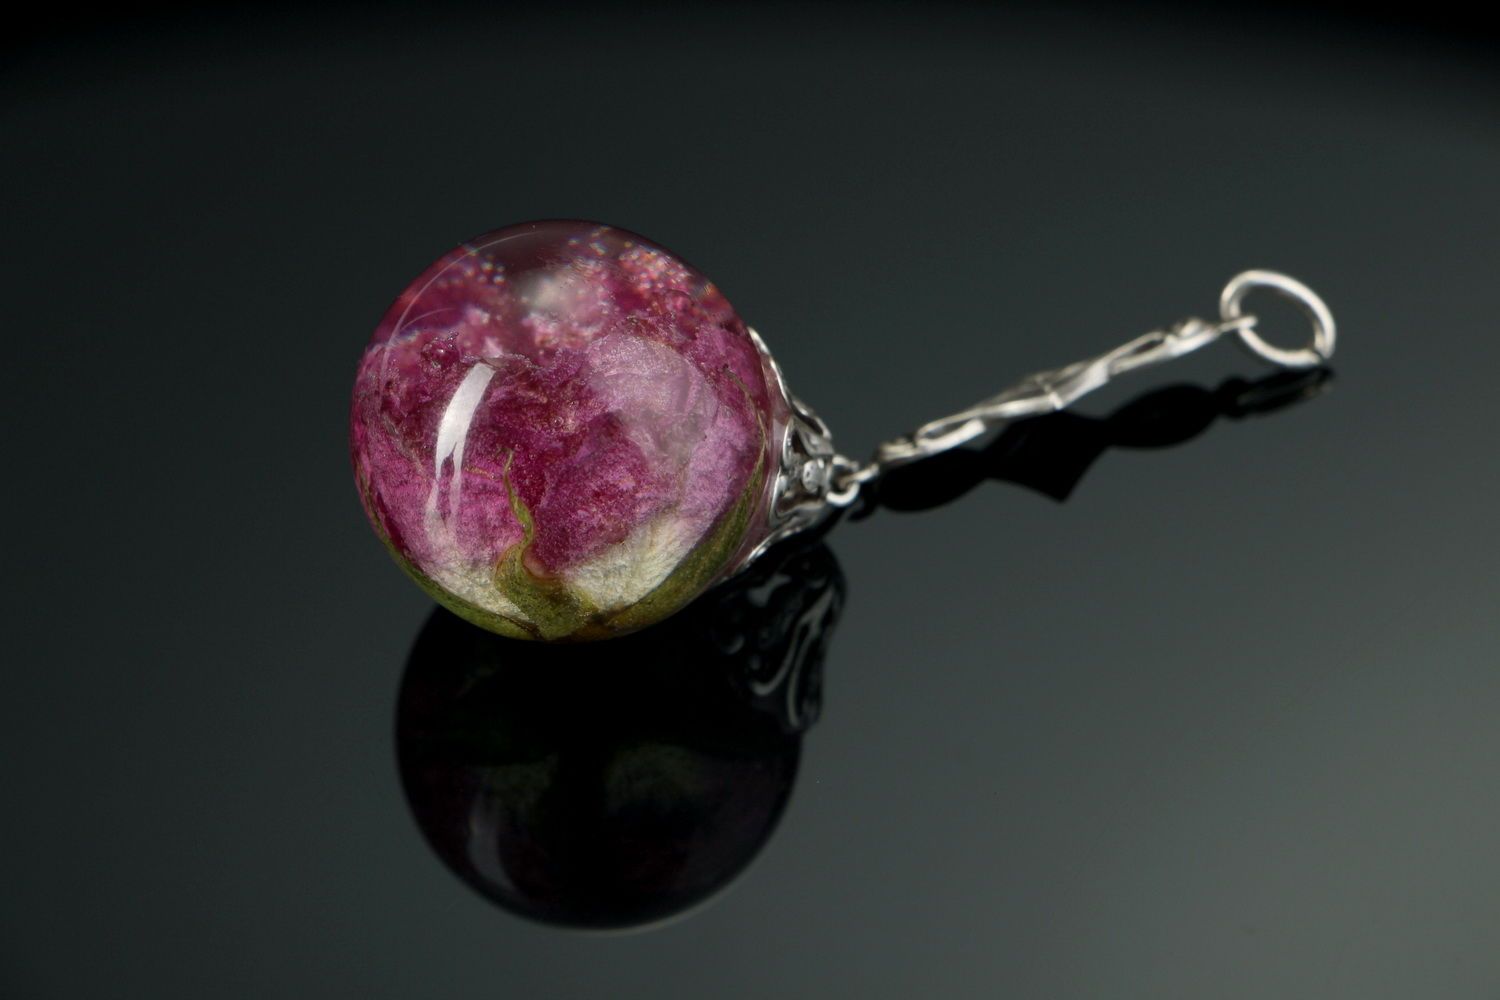 Pendant made of rose embedded in epoxy photo 3